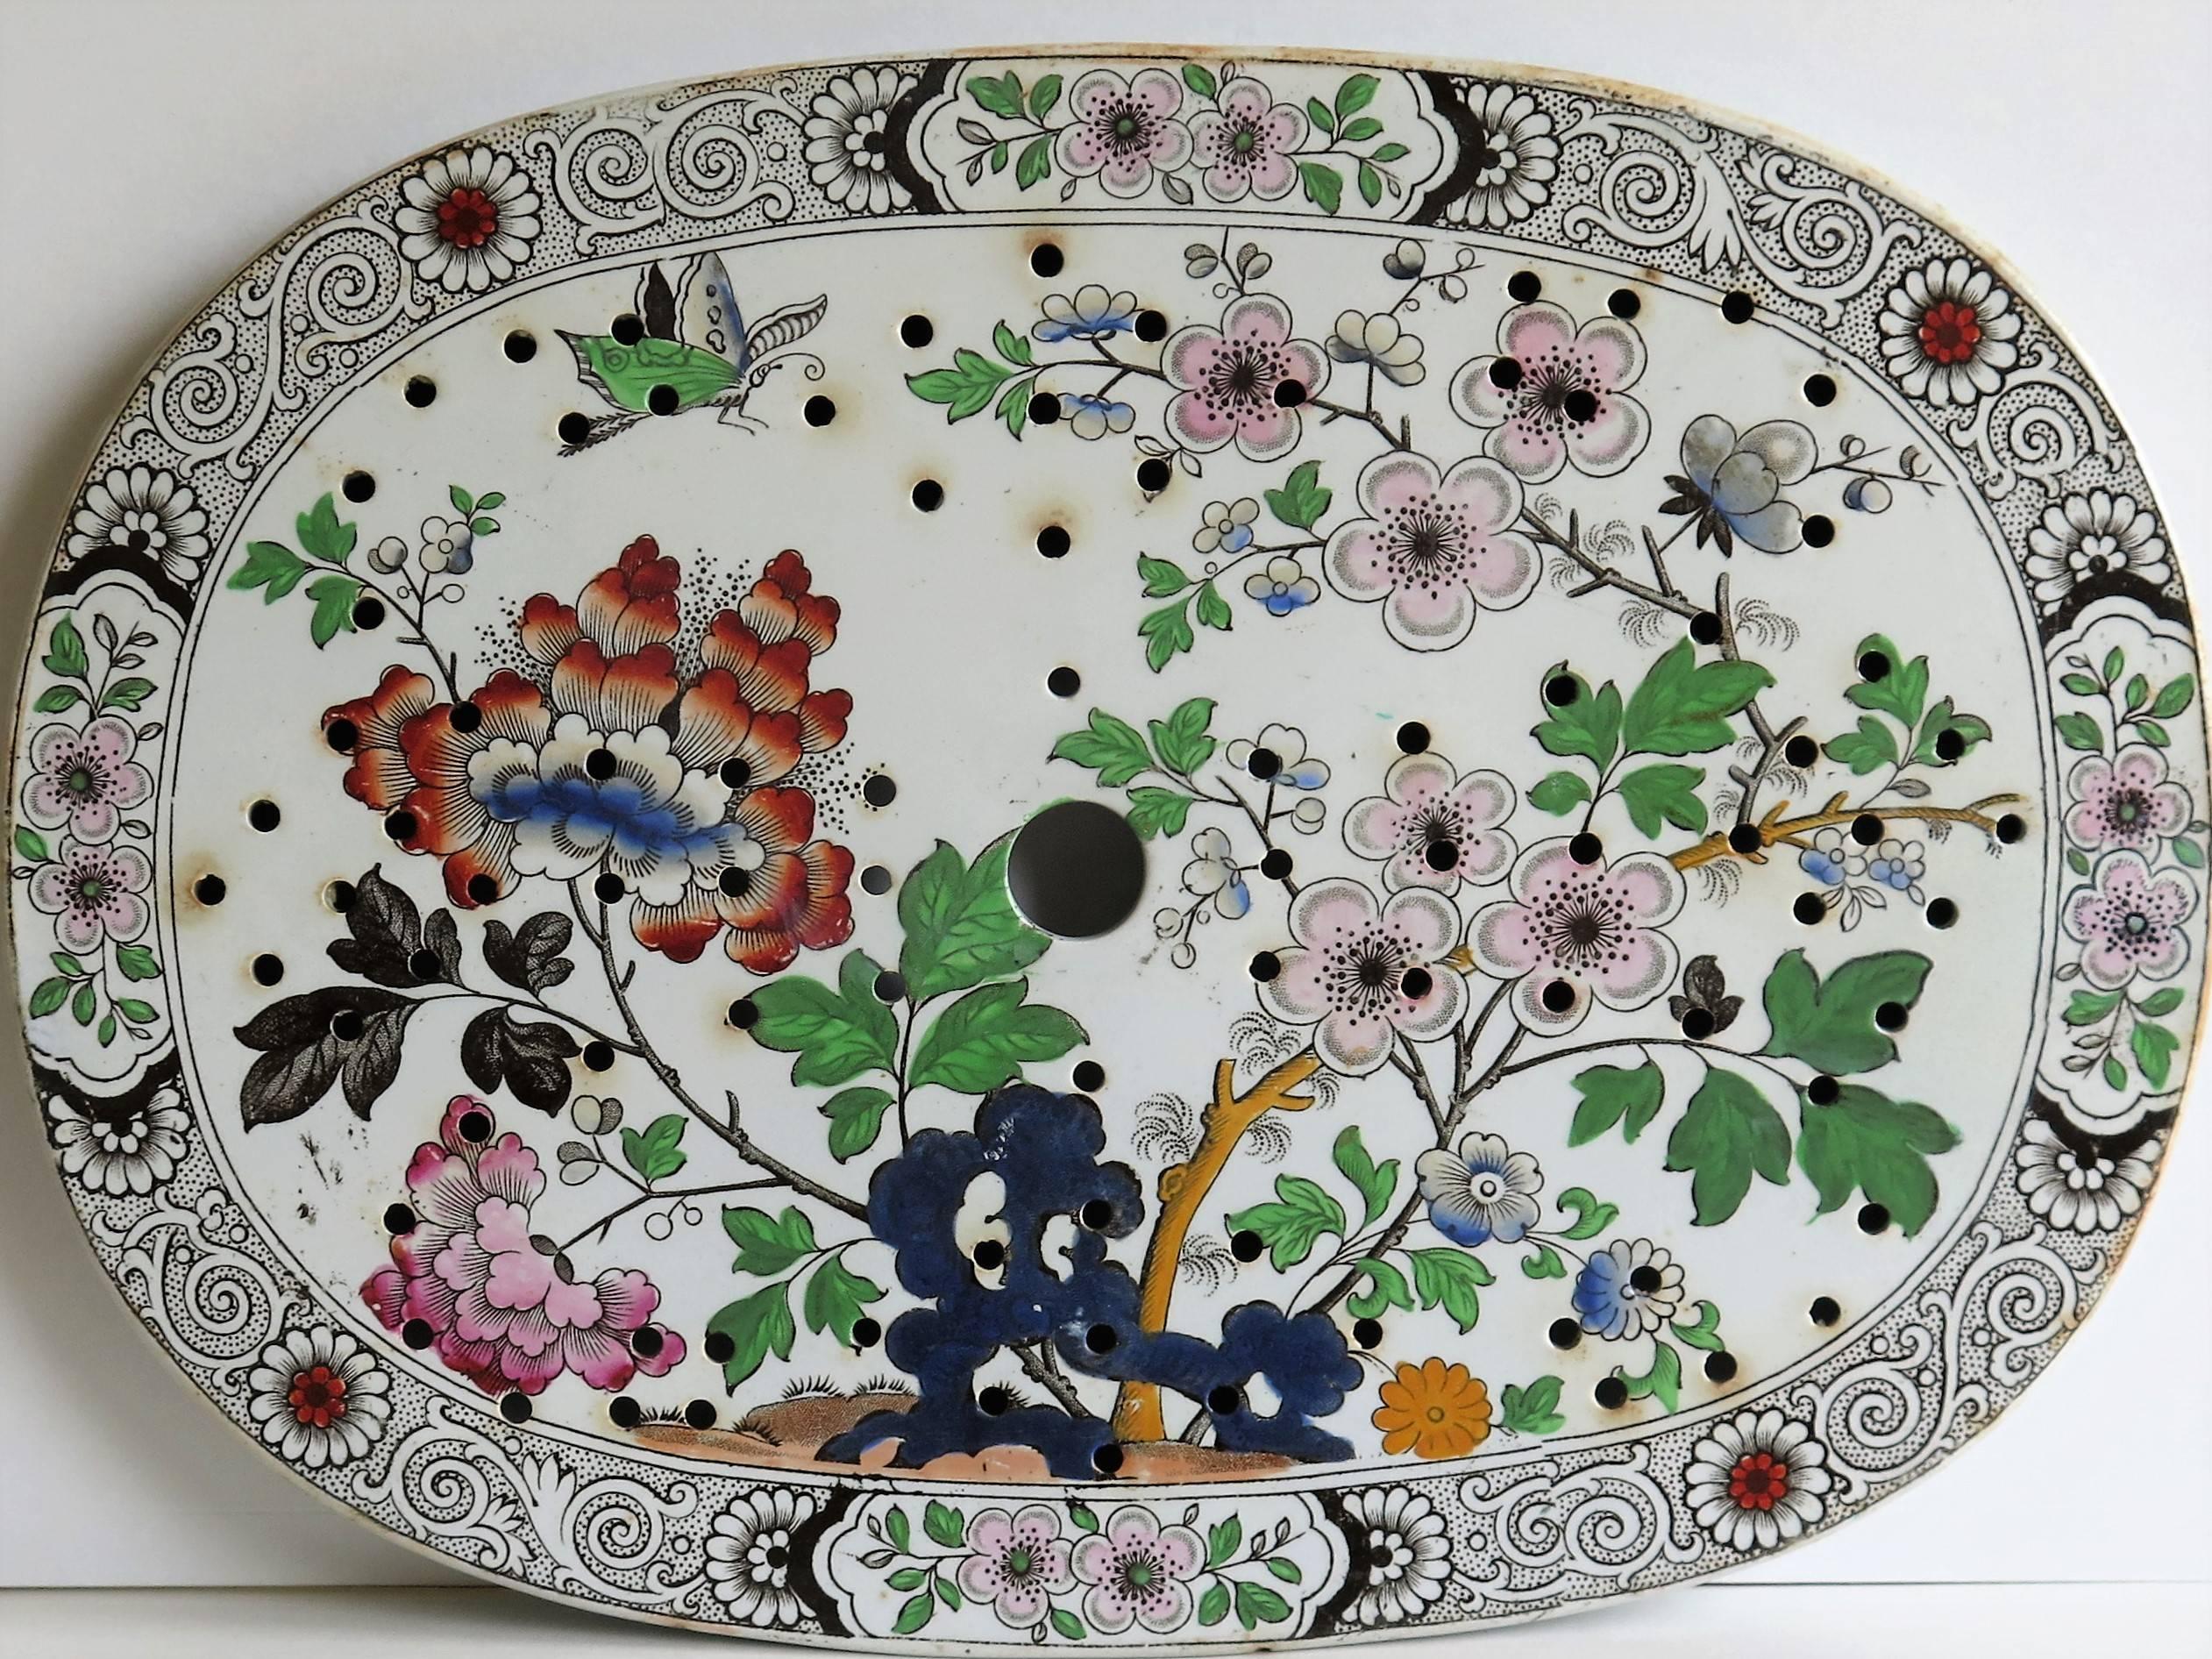 This is a good rounded oval ironstone (stone china) drainer plate, Circa 1830, which we attribute to the factory of Hicks, Meigh and Johnson of Shelton, Staffordshire Potteries, England, who made good quality earthenware and ironstone wares between